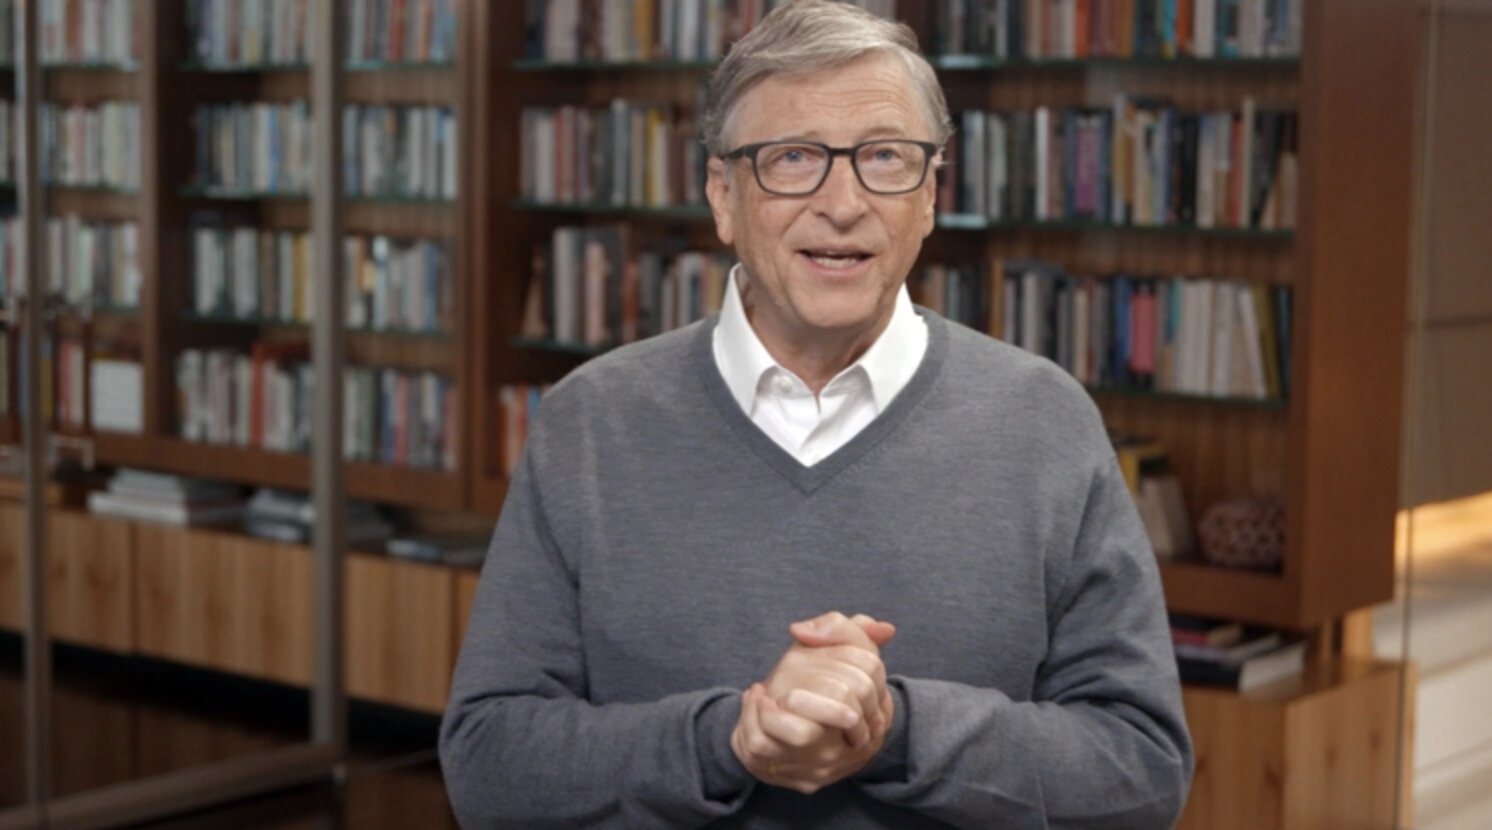 BILL GATES’ INFLUENCE EXPOSED: FOUNDATION DONATED OVER $250 MILLION TO MEDIA OUTLETS